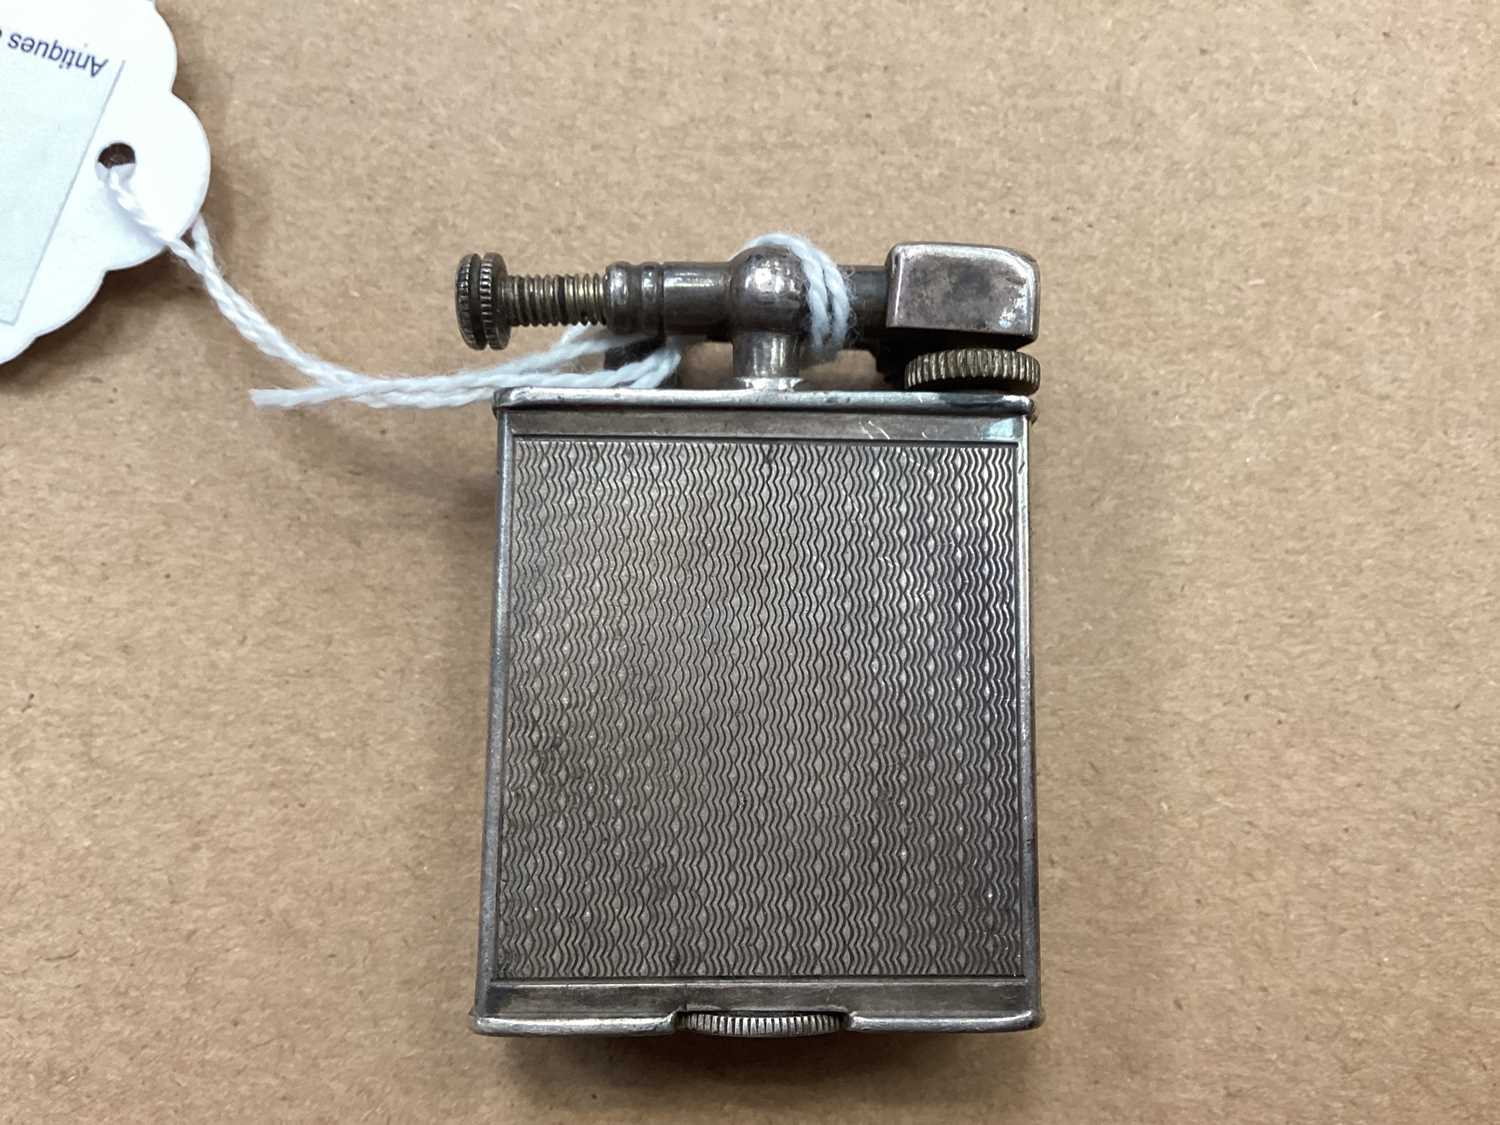 A silver Parker Beacon (Dunhill) lighter, c.1930, import marks Alfred Dunhill Ltd - Image 4 of 8